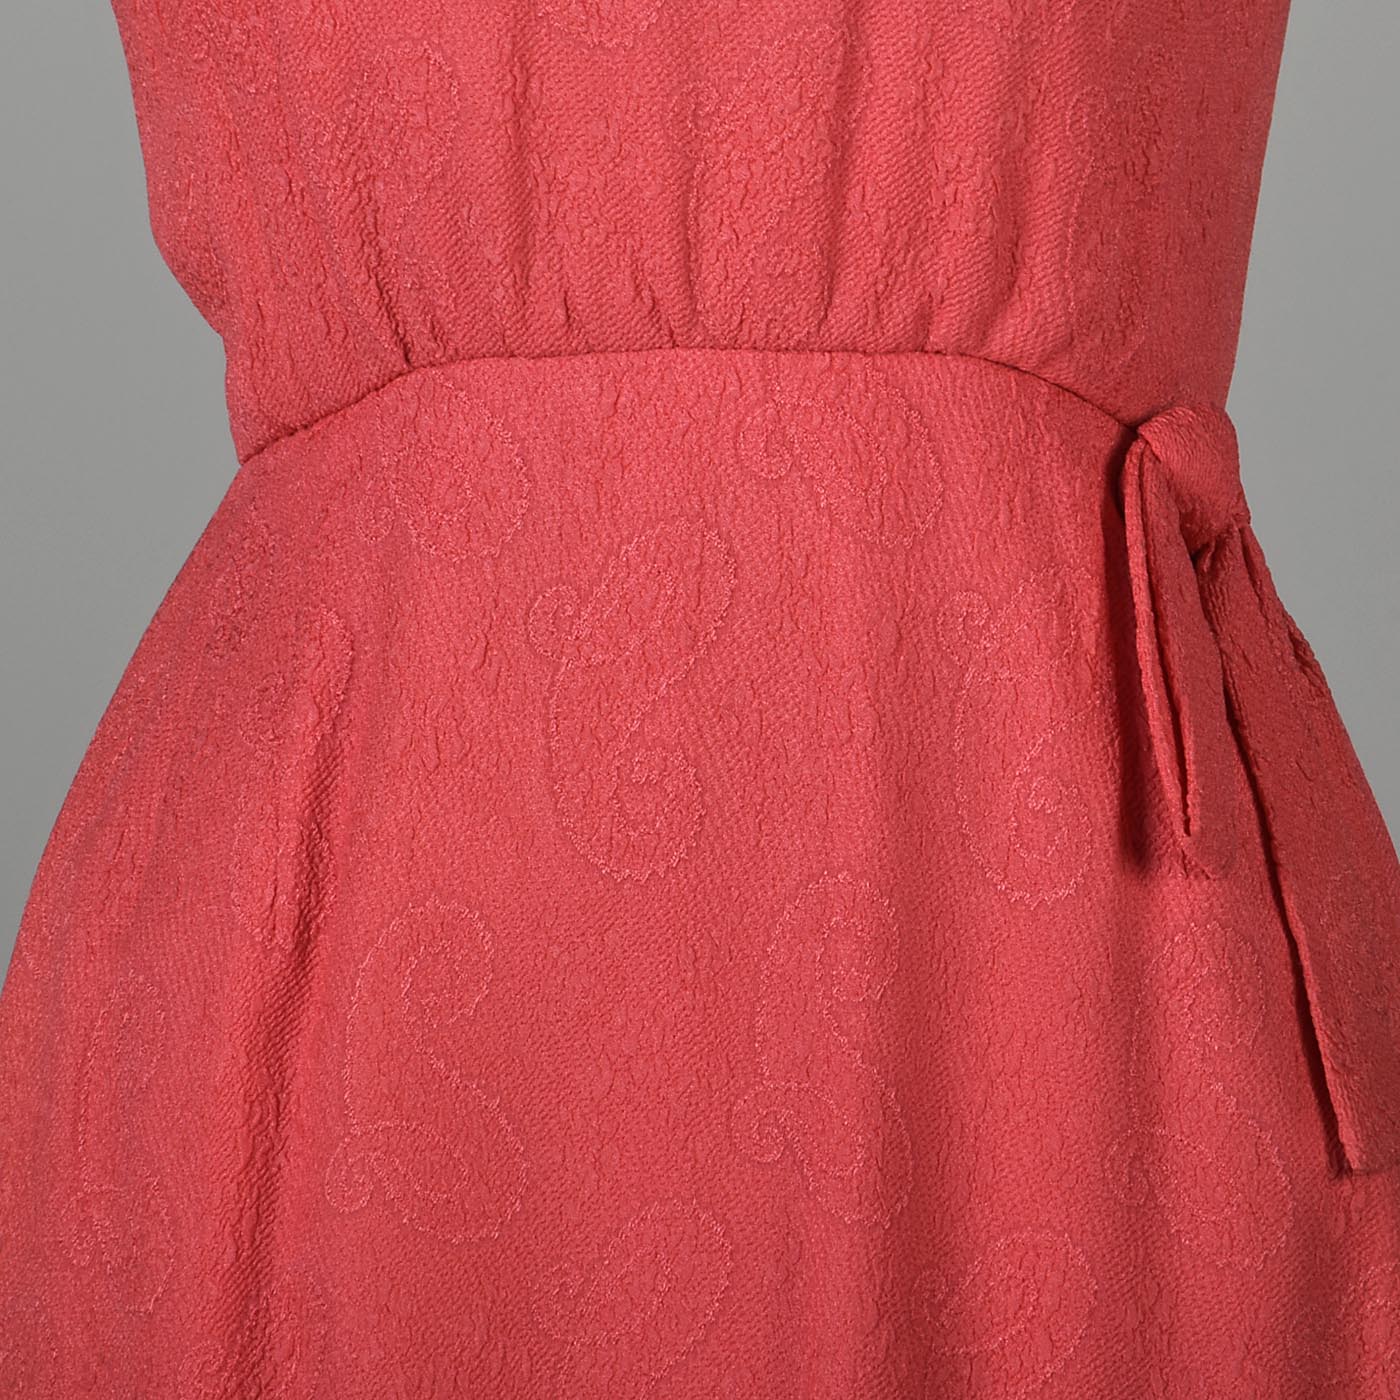 1960s Pink Cocktail Dress with Faux Wrap Skirt